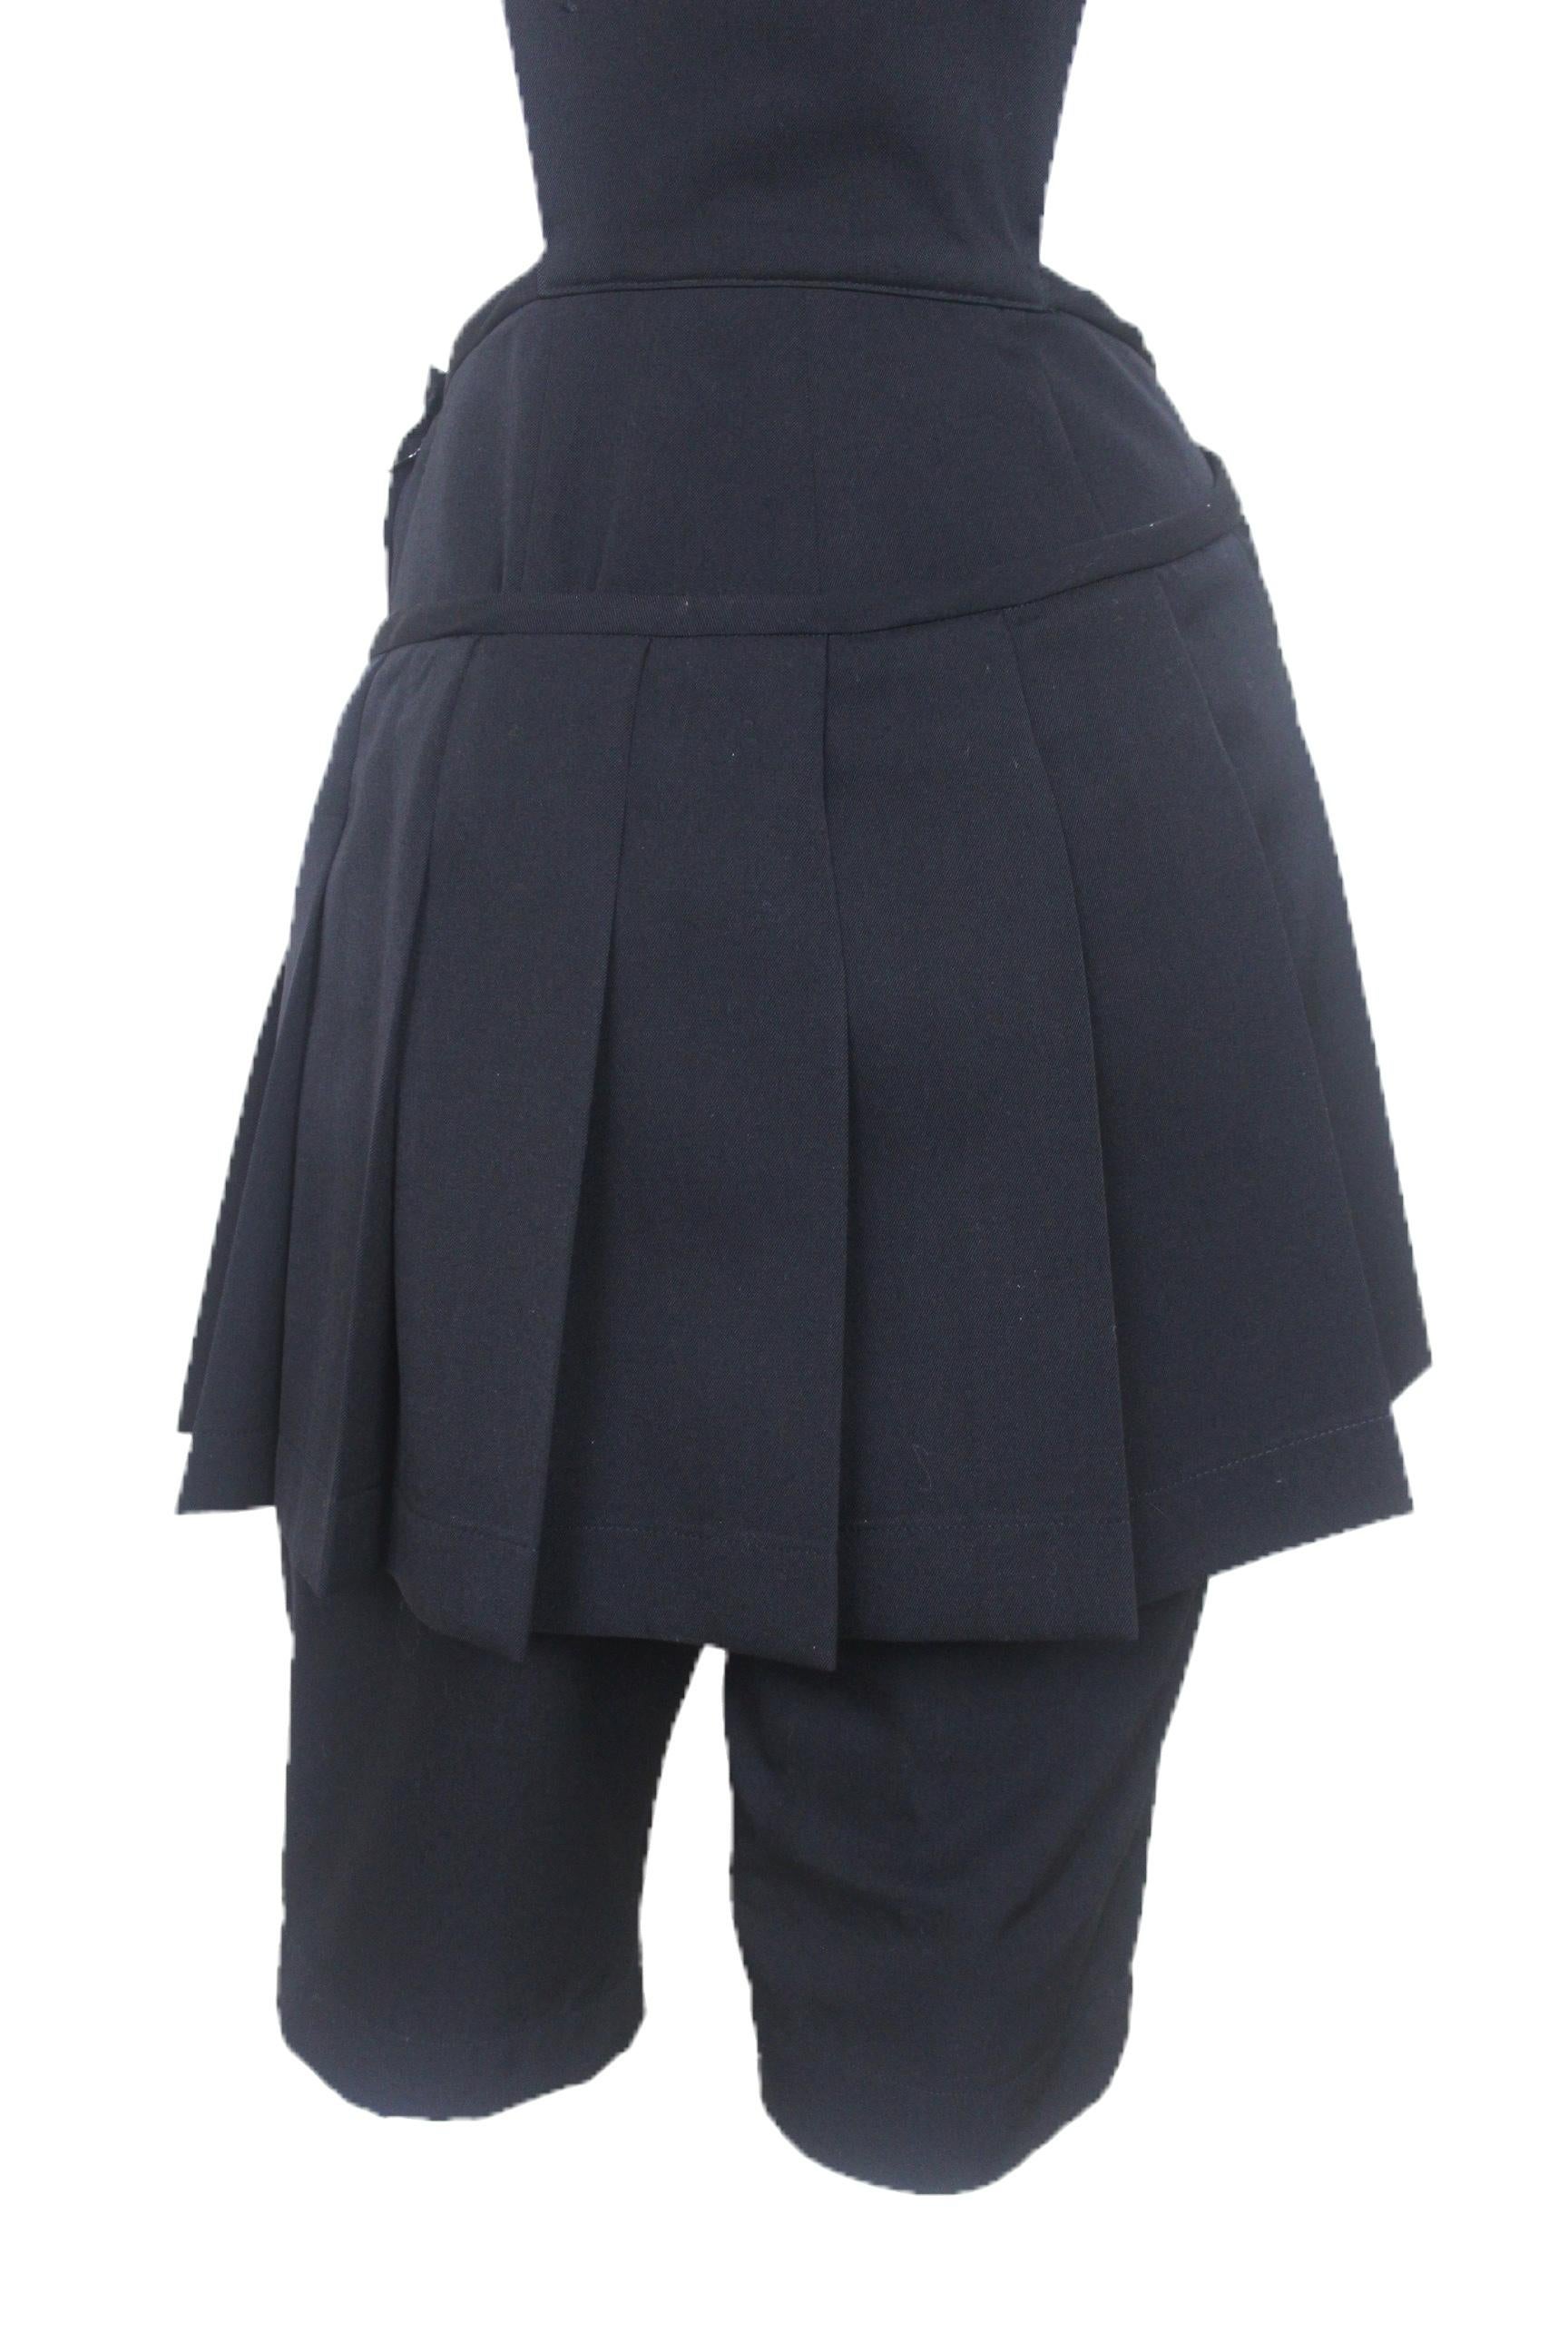 Comme des Garcons 1989 Collection Reverse Dungarees with attached Skirt For Sale 8